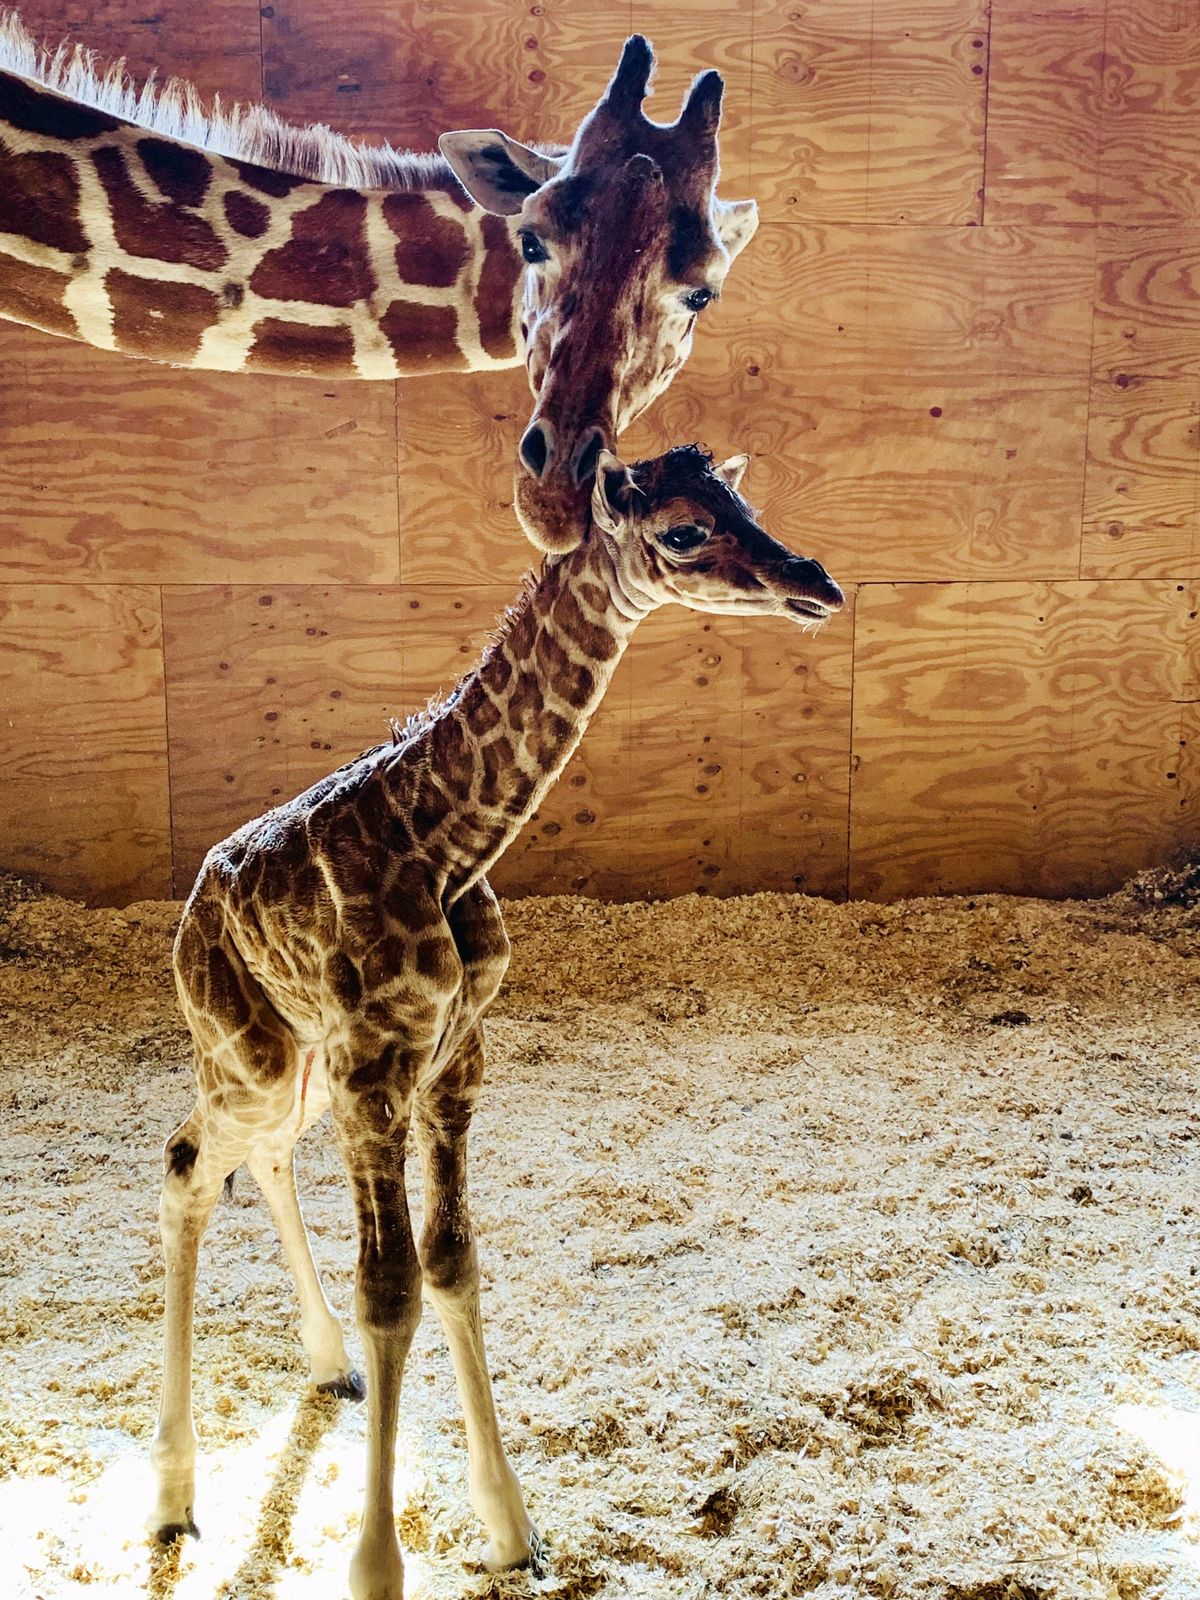 This photo provided by Animal Adventure Park shows April the Giraffe with her new male calf on Saturday, March 16, 2019, in Harpursville, N.Y. The Animal Adventure Park said April gave birth to a healthy male calf Saturday. They say more than 300,000 watched live. (Animal Adventure Park via AP)